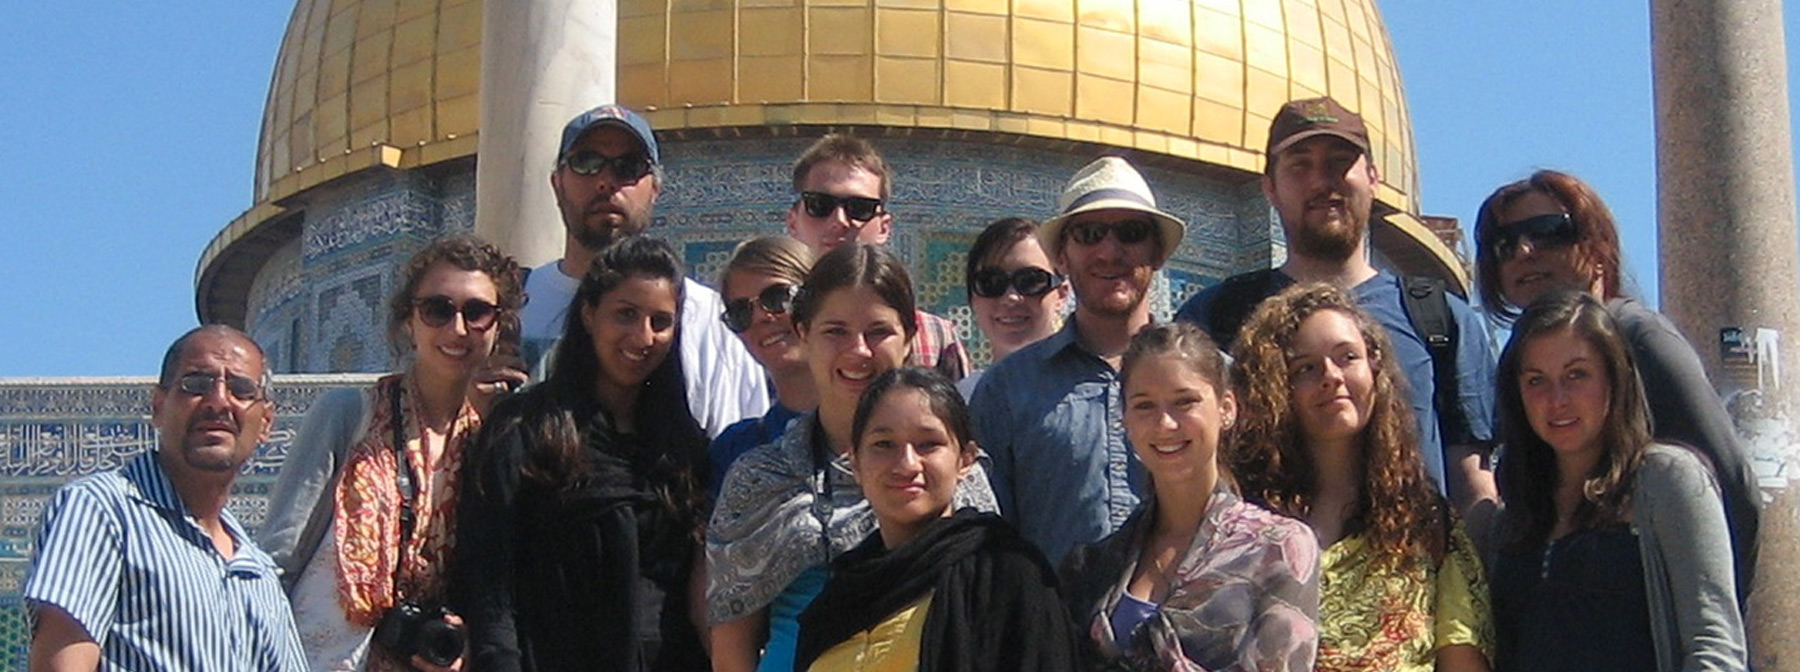 Student and Faculty outside the Dome of the Rock in Jerusalem